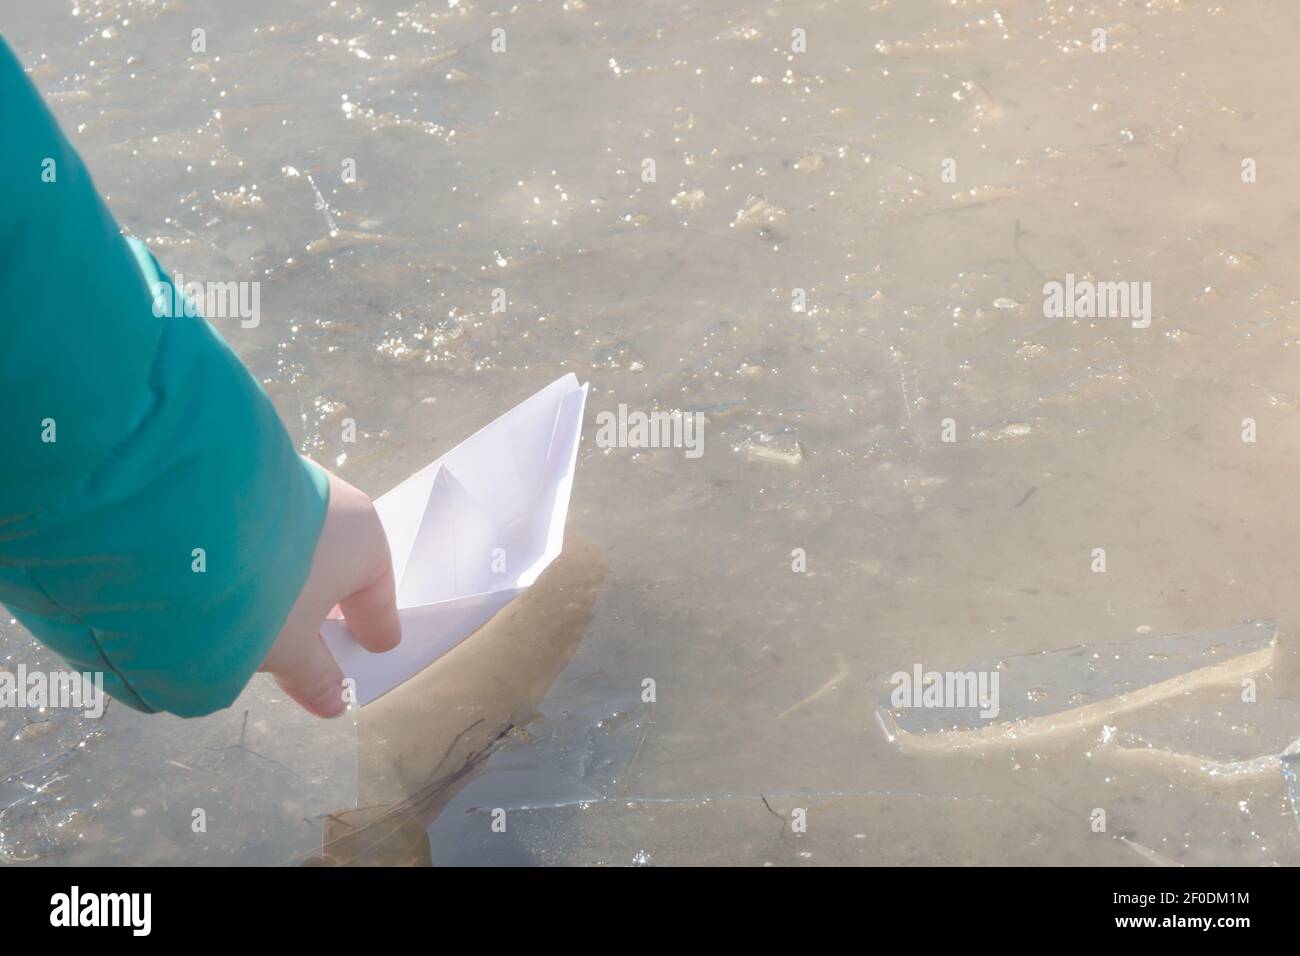 White paper ship is sent on journey into first spring puddle. Child's hand with origami in sunlight. Early spring mood concept, freedom. Stock Photo